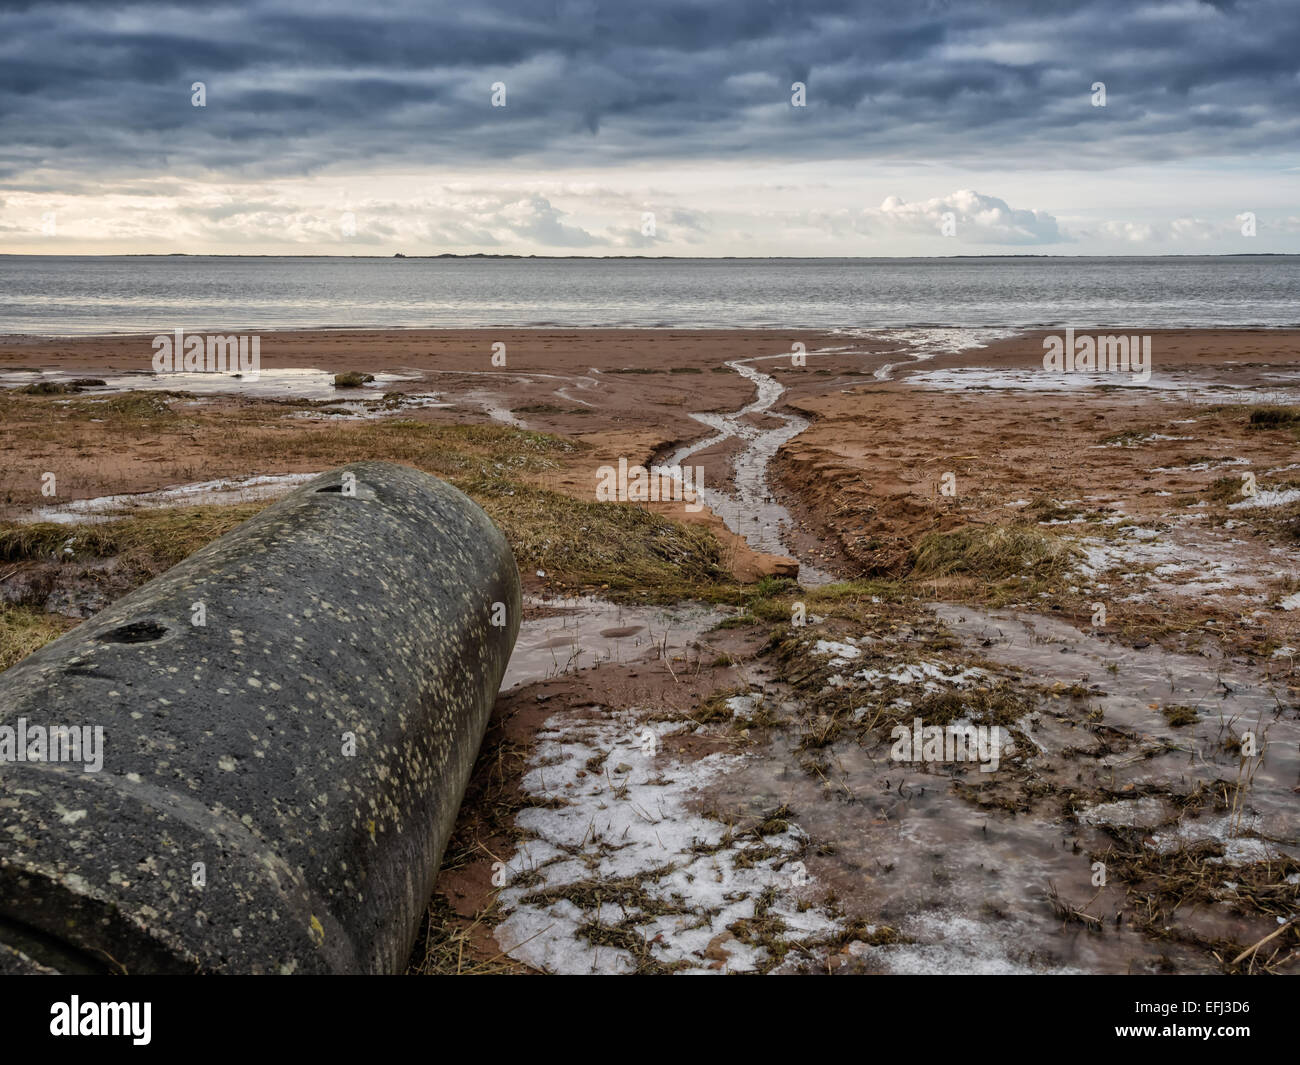 Water outlet pipe on an empty beach Stock Photo